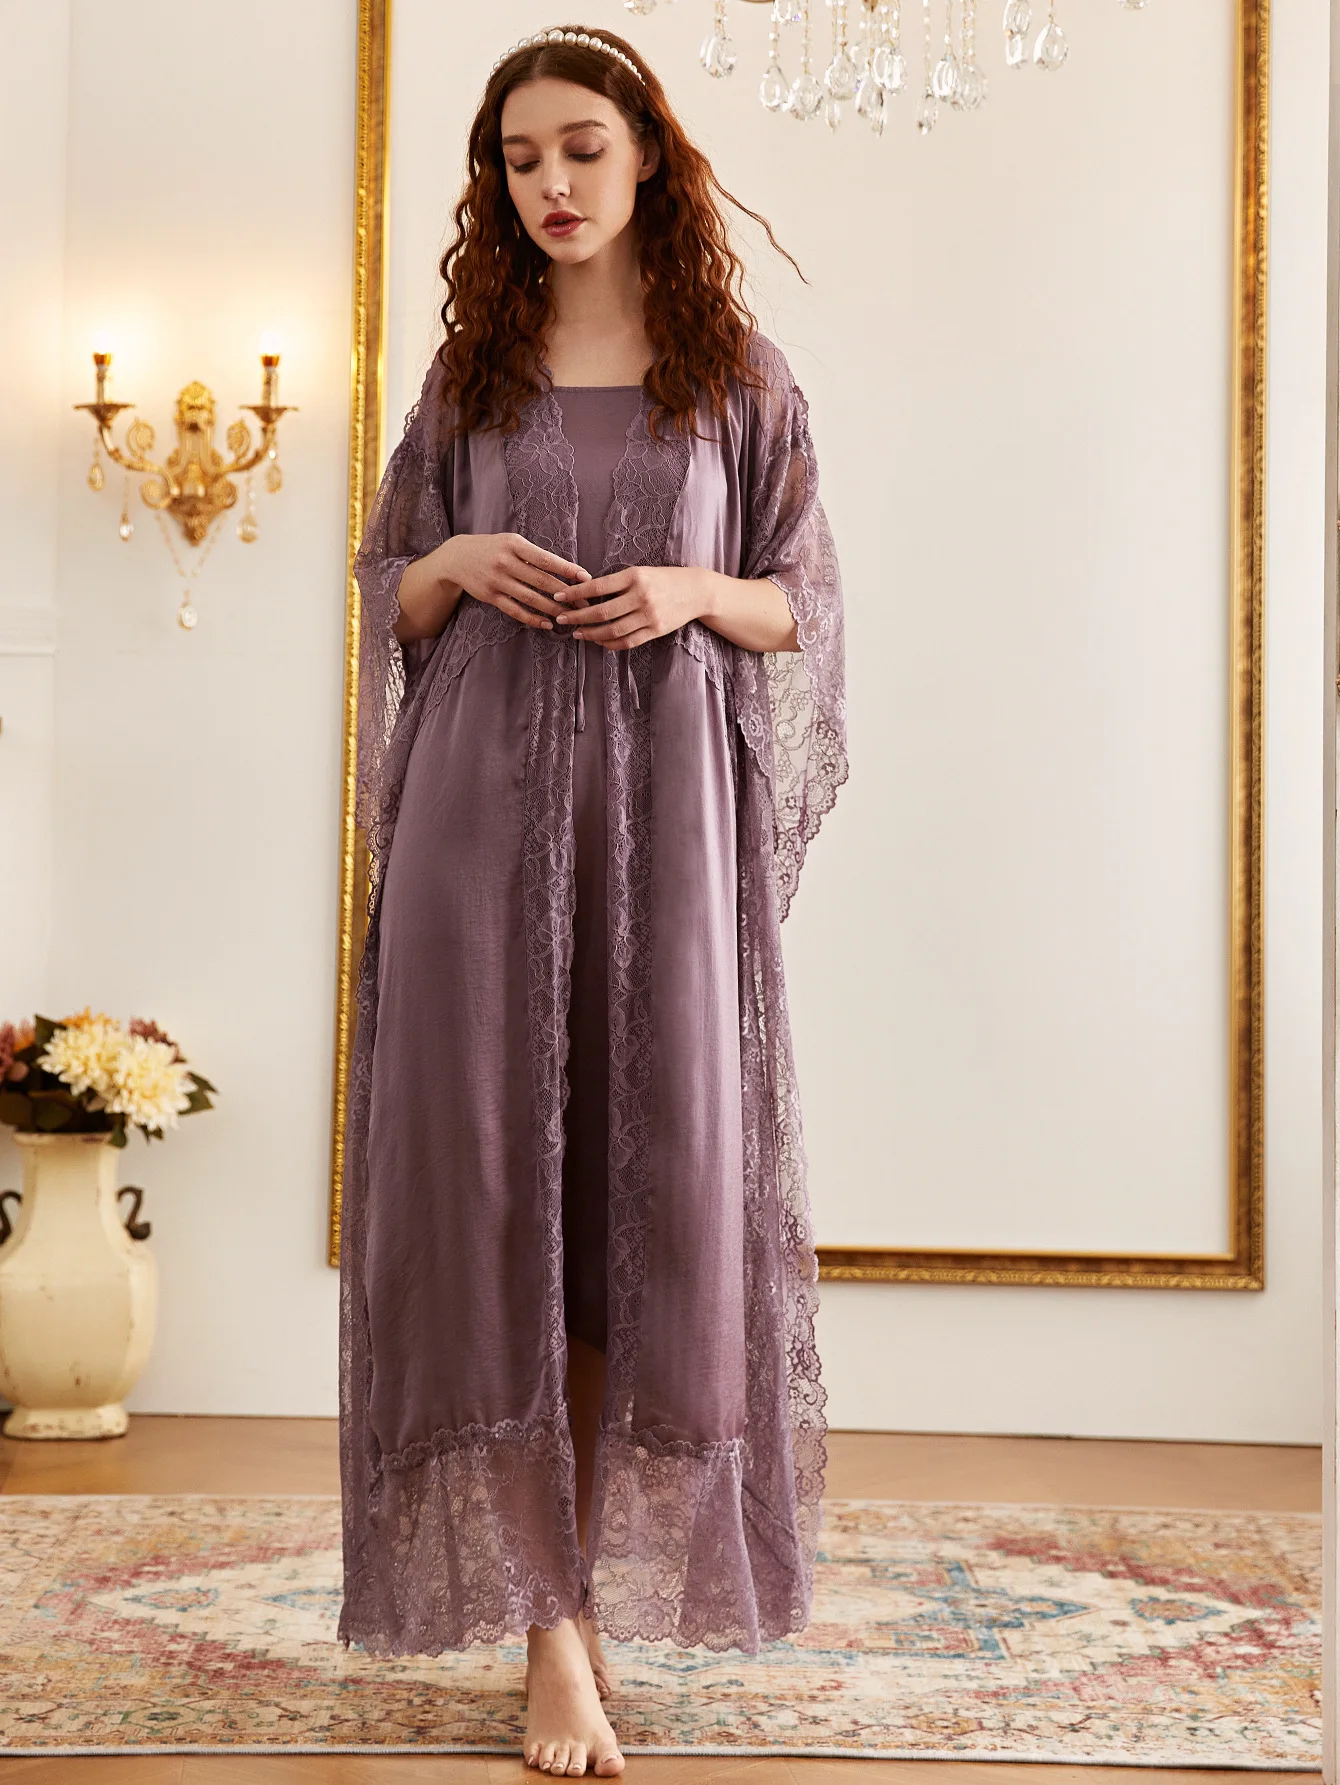 

Middle East Court Ladies Lace Loose Plus Size Nightgown 2-piece Home Clothes Nightgowns Sleepshirts Robe Gown Sets